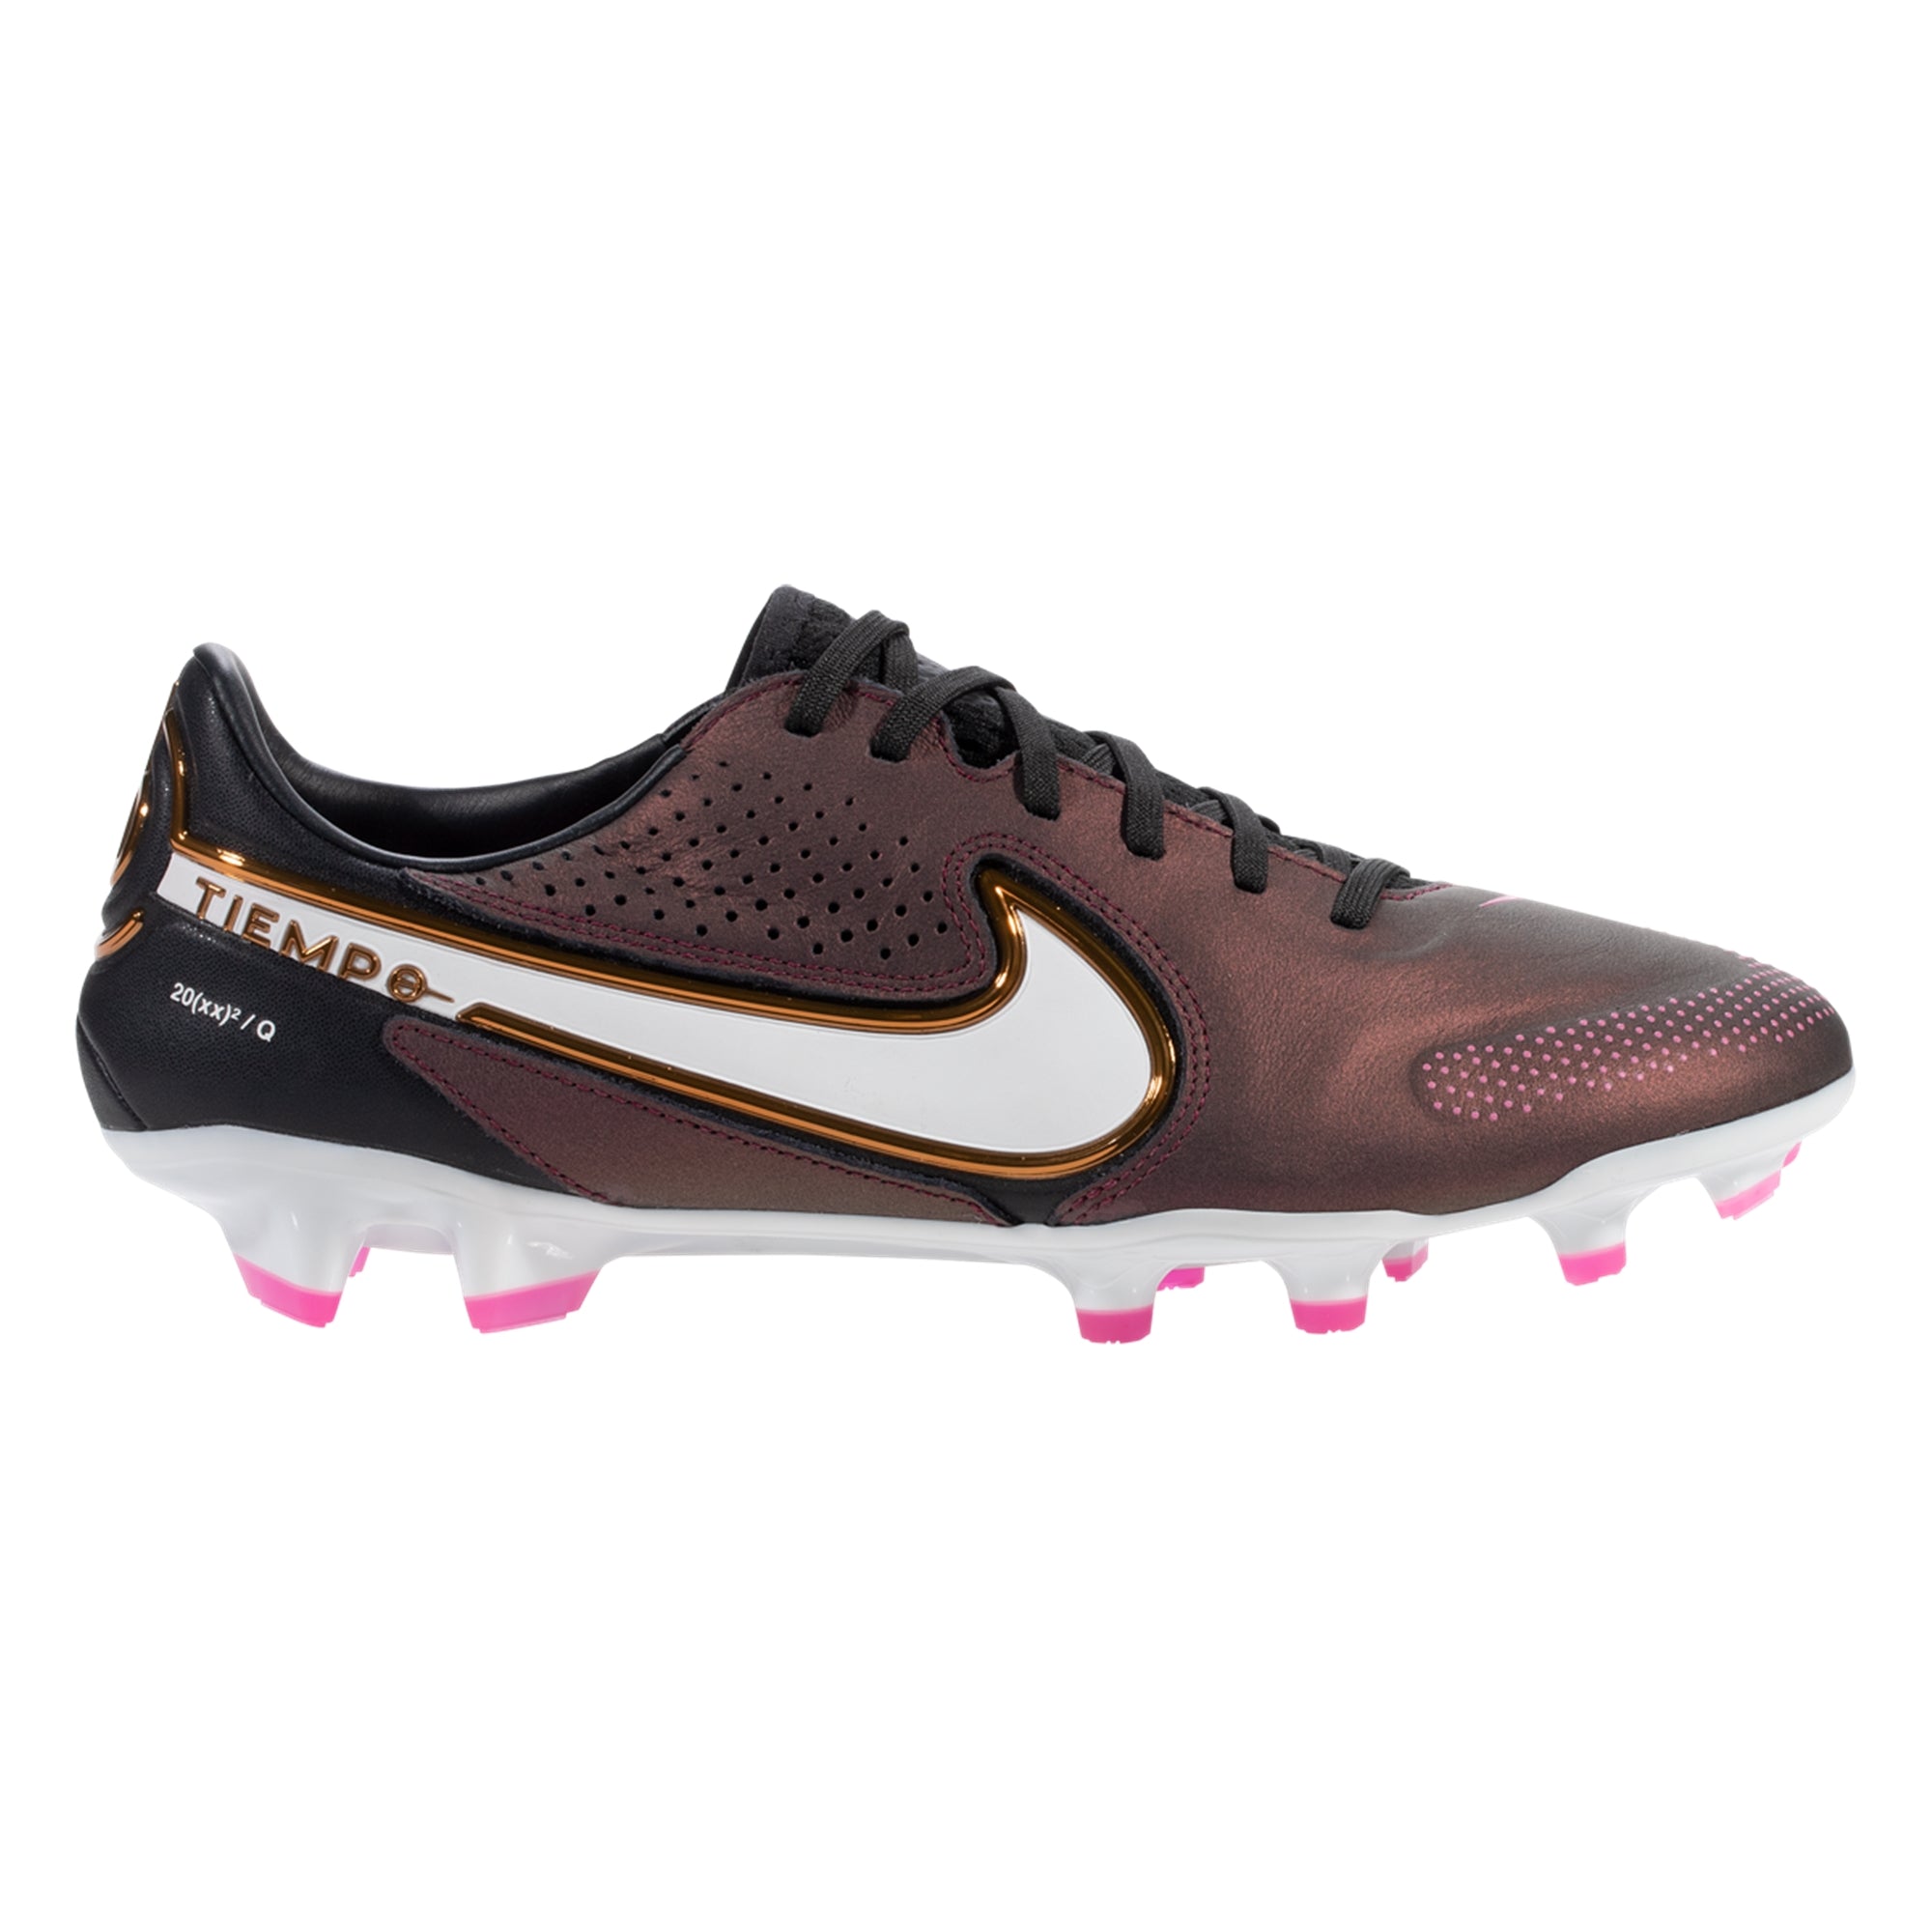 Nike Tiempo Legend 9 Pro Q FG Firm Ground Soccer Cleats - Space Soccer Zone USA